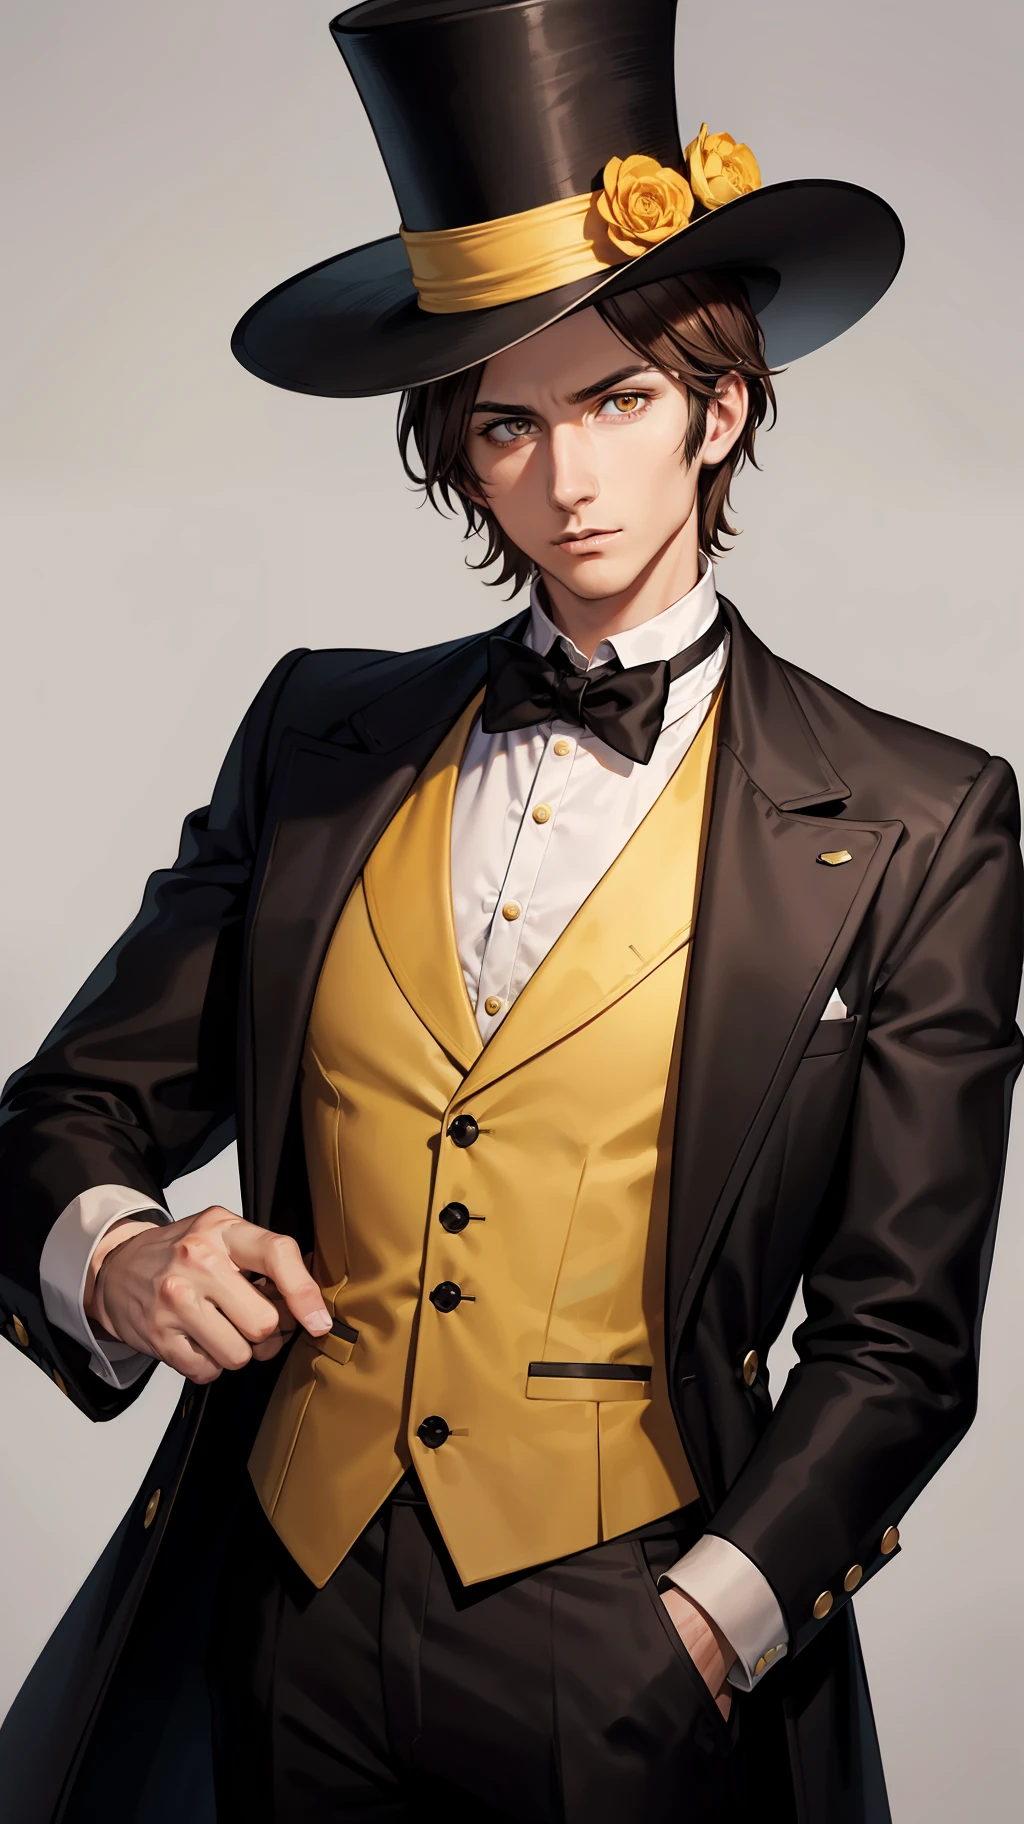 A 28-year-old man, brown hair and yellow eyes besides he has a dryer on his face, his clothes are black with some white details and also he wears a top hat, he is a traveling tailor